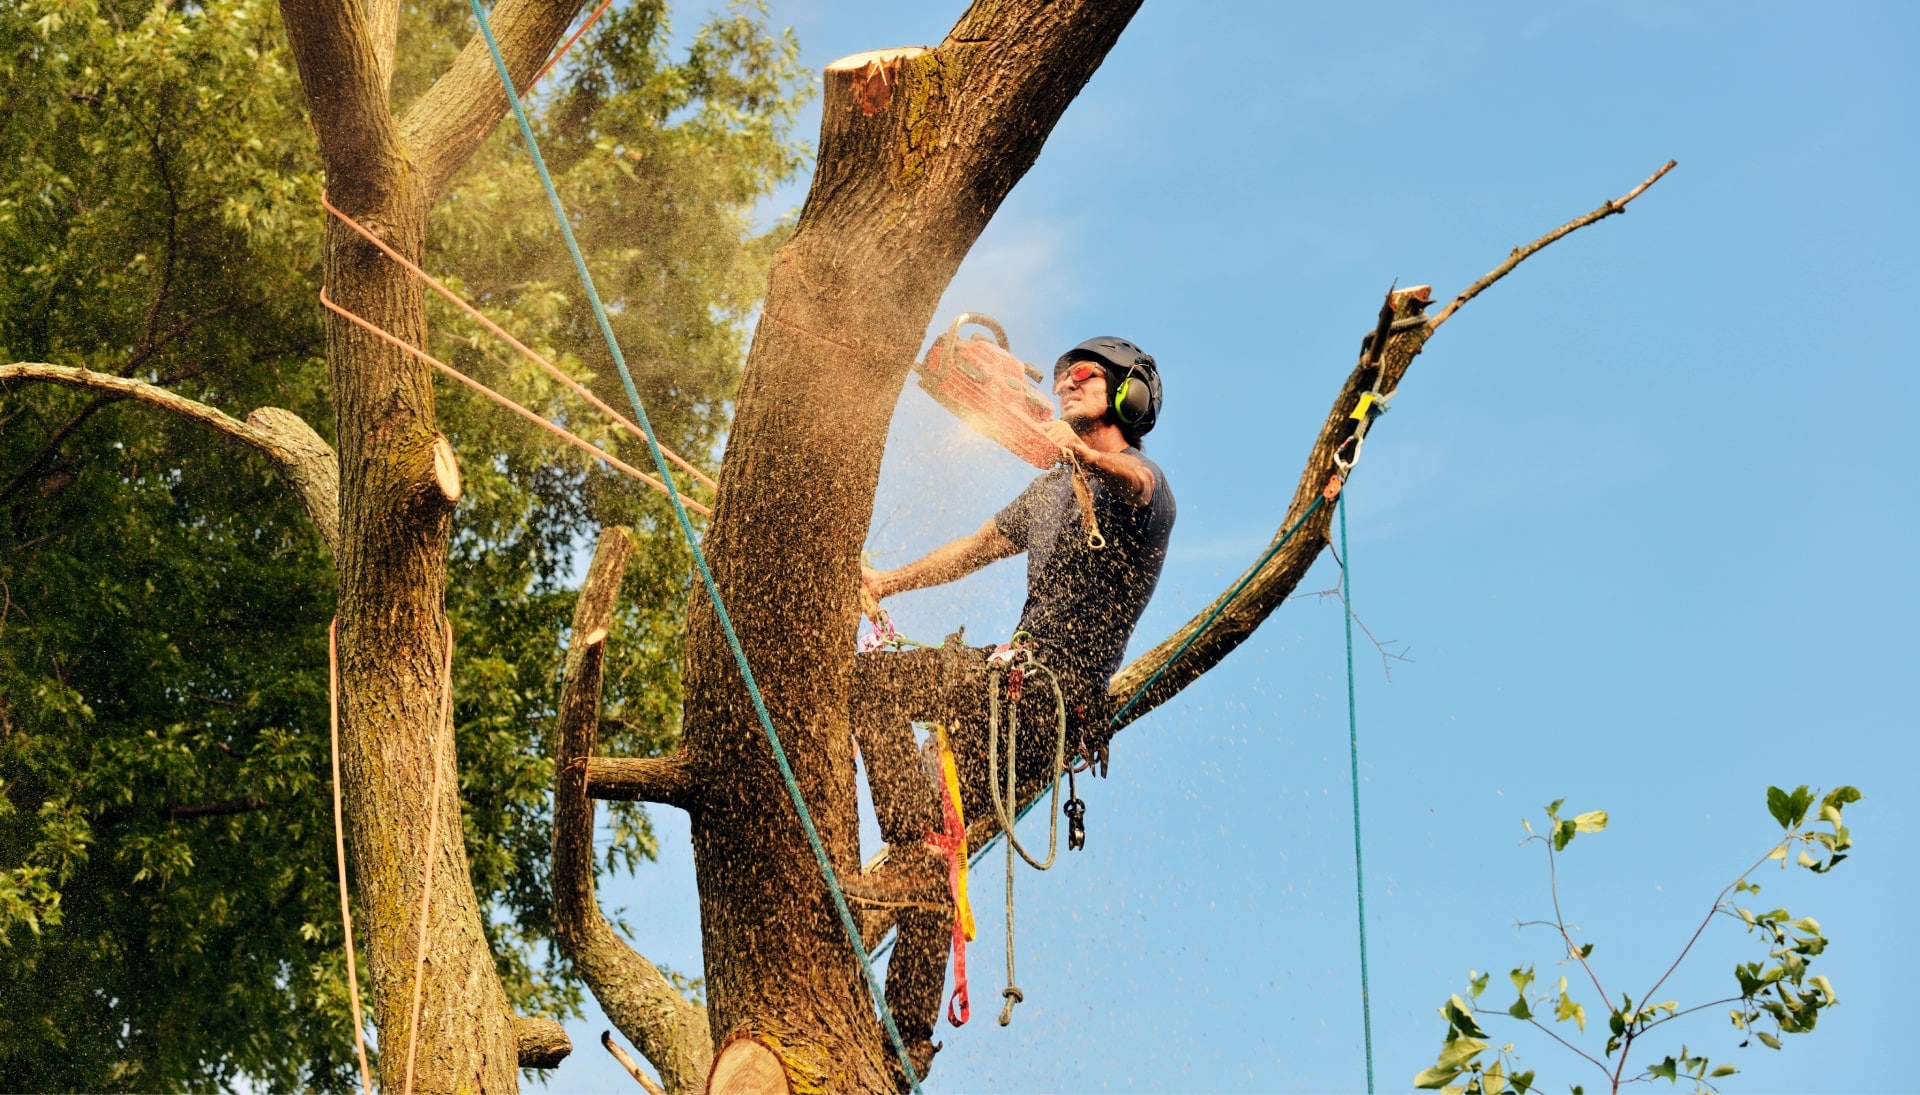 Utica tree removal experts solve tree issues.